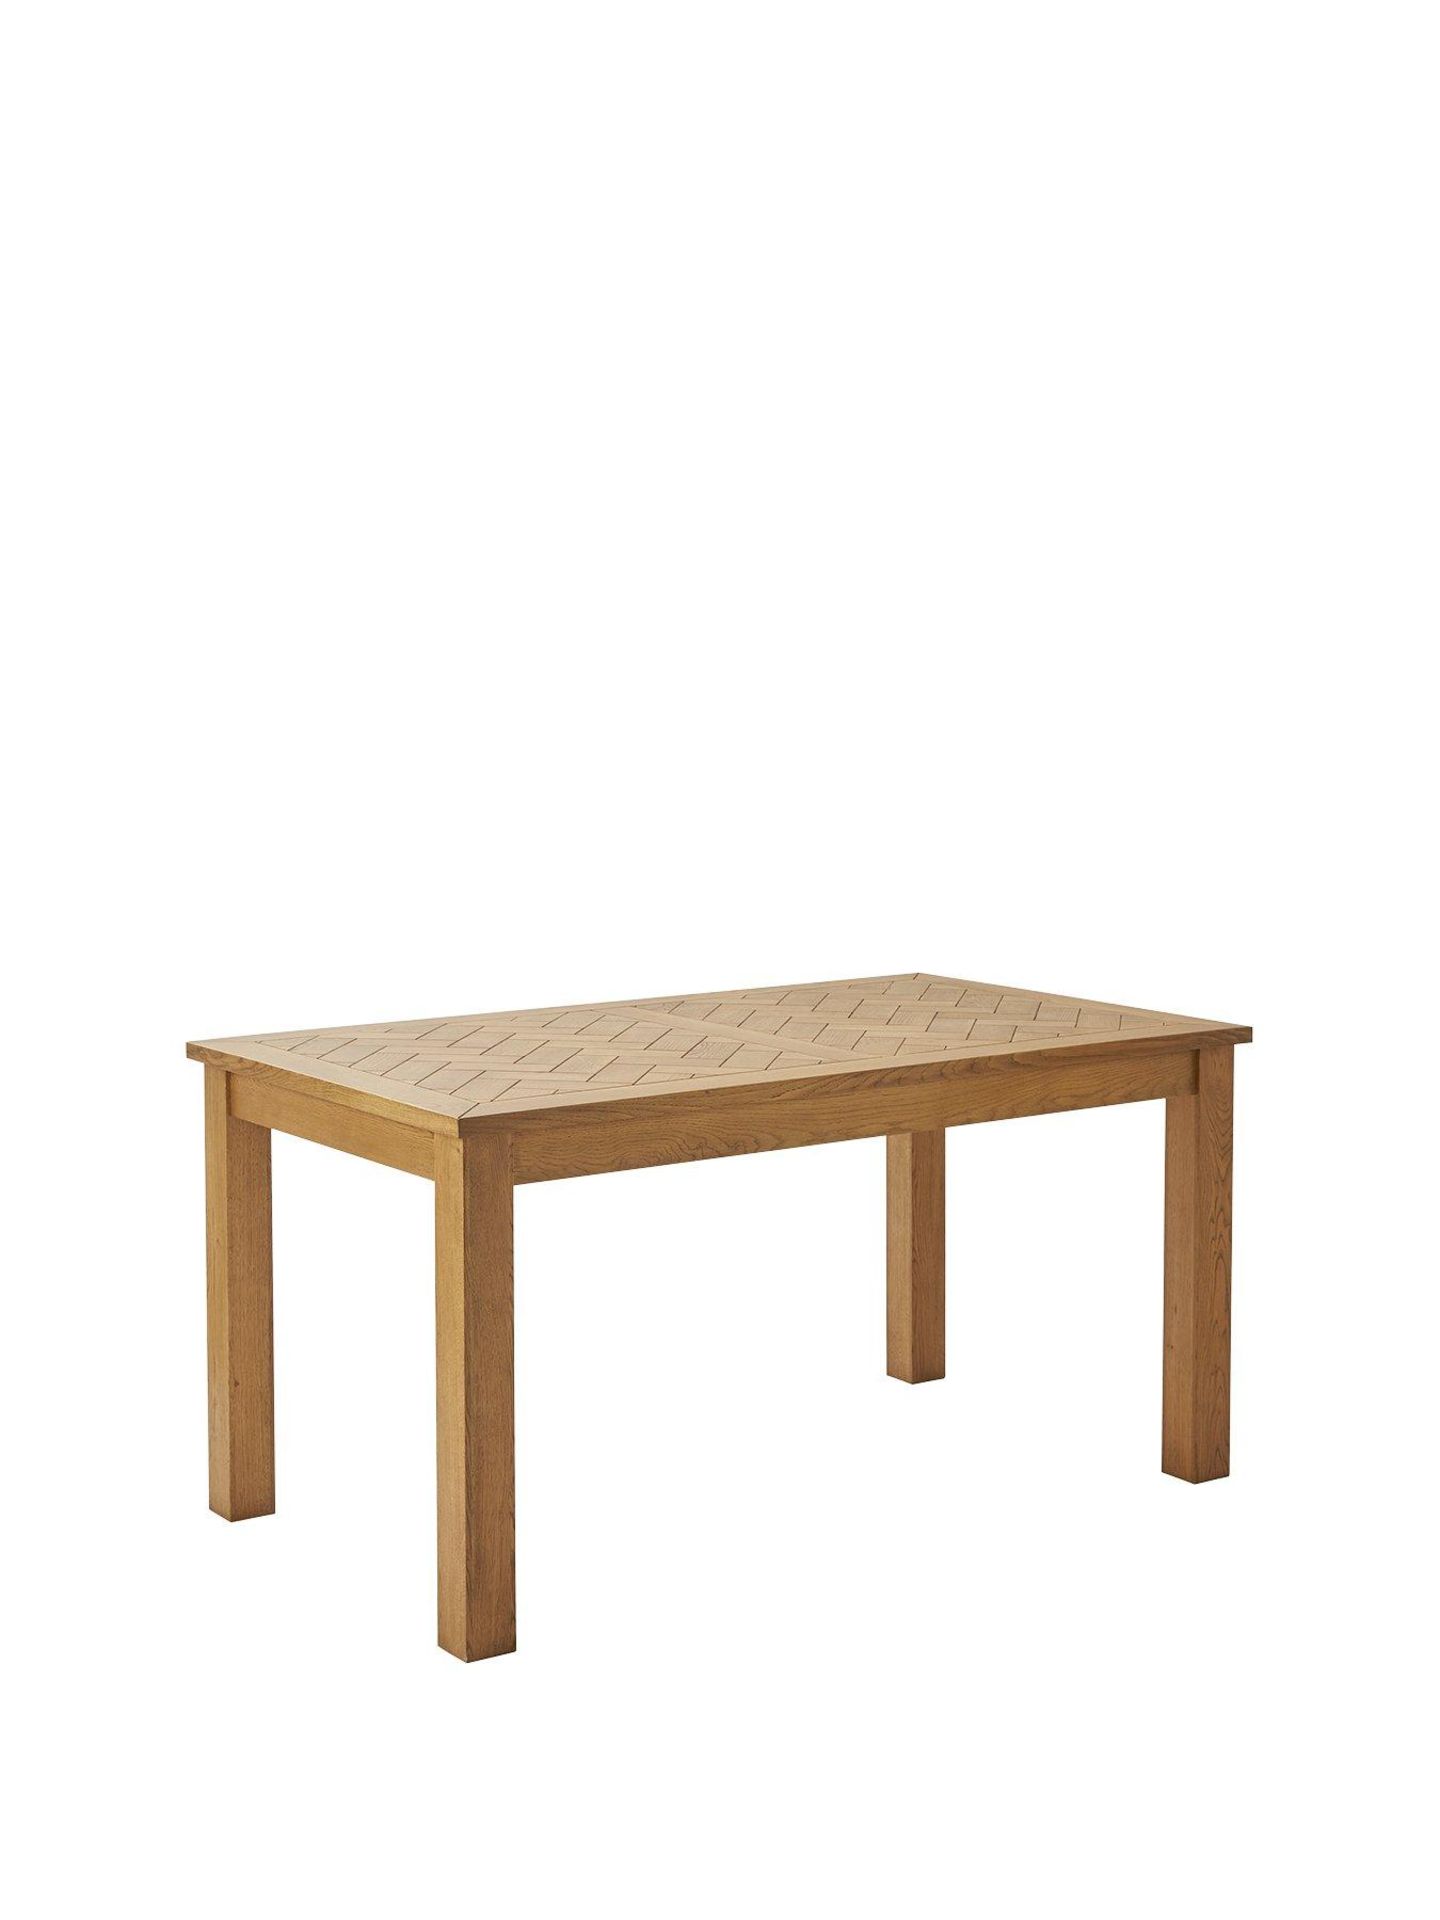 Boxed Item Ideal Home Parquet Real Oak Dining Table [Oak] 74X150X85Cm rrp, £562.0